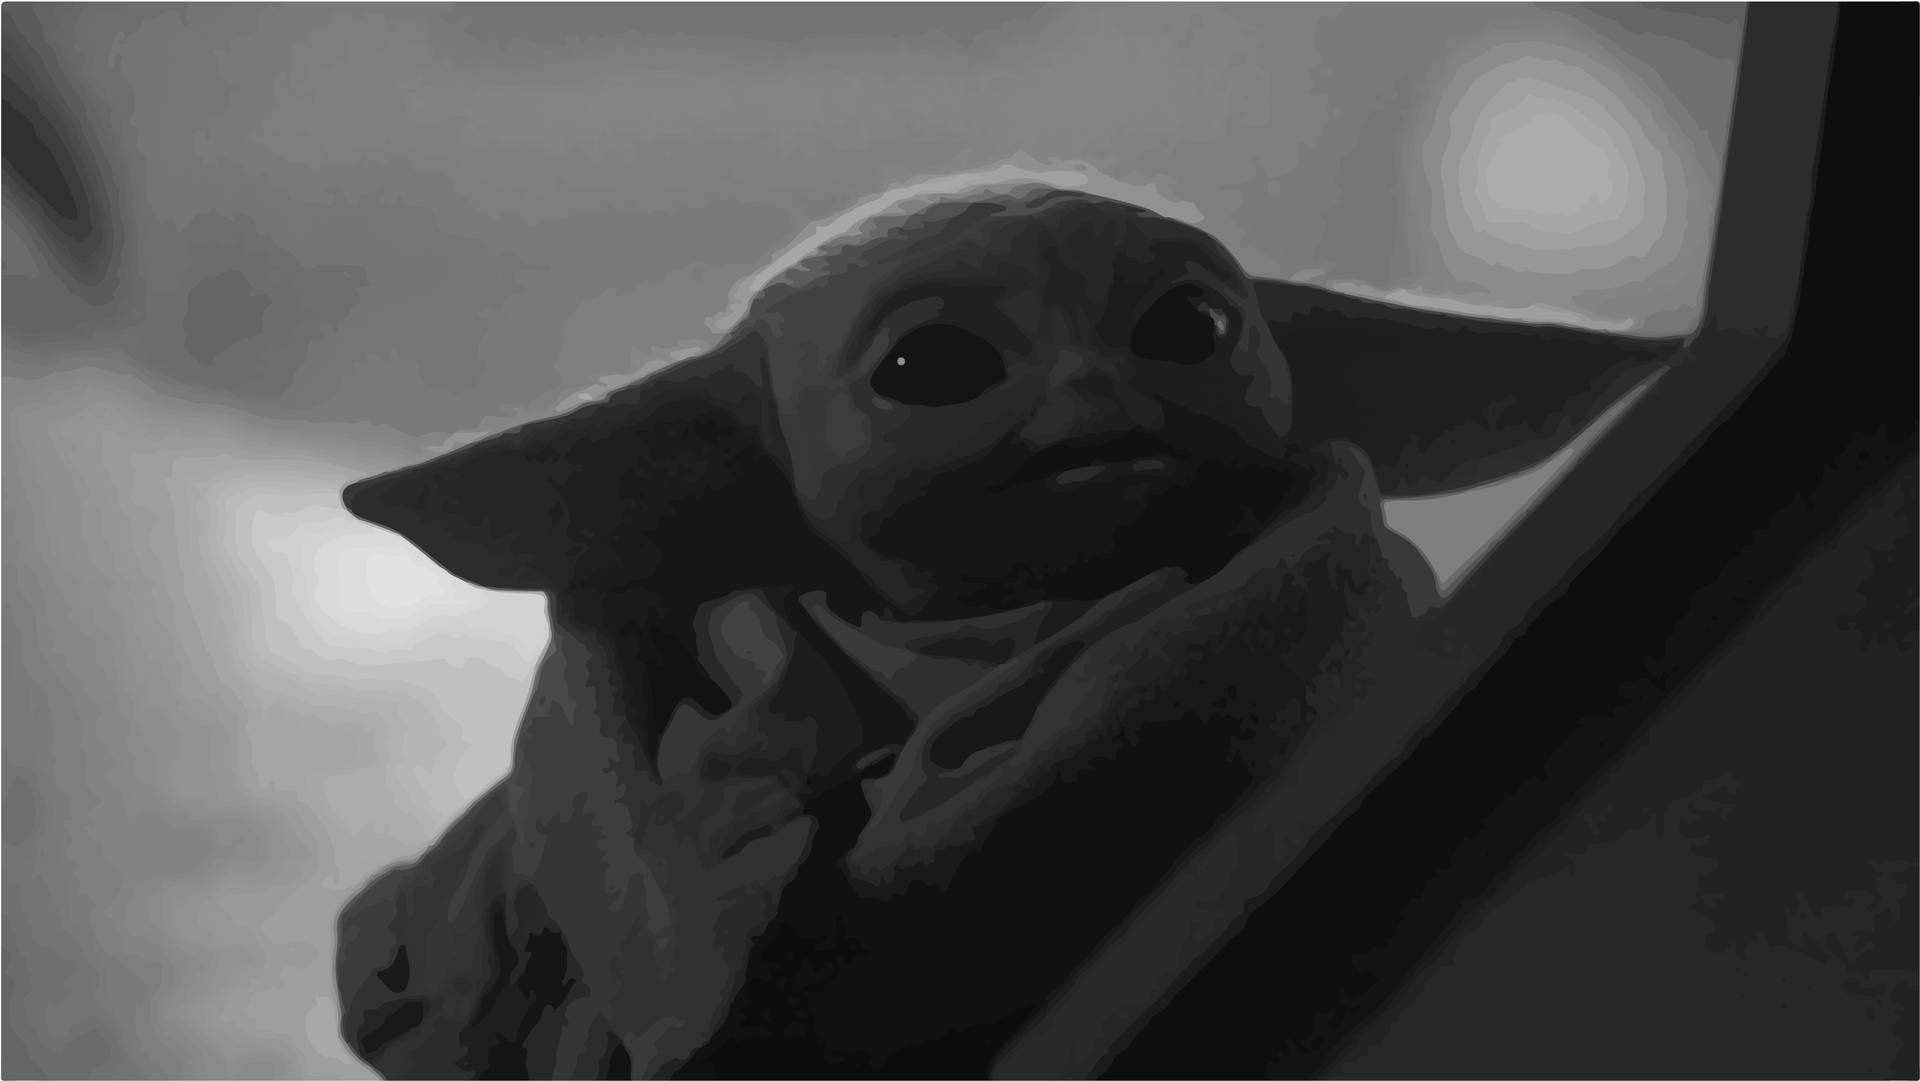 5004X2817 Baby Yoda Wallpaper and Background